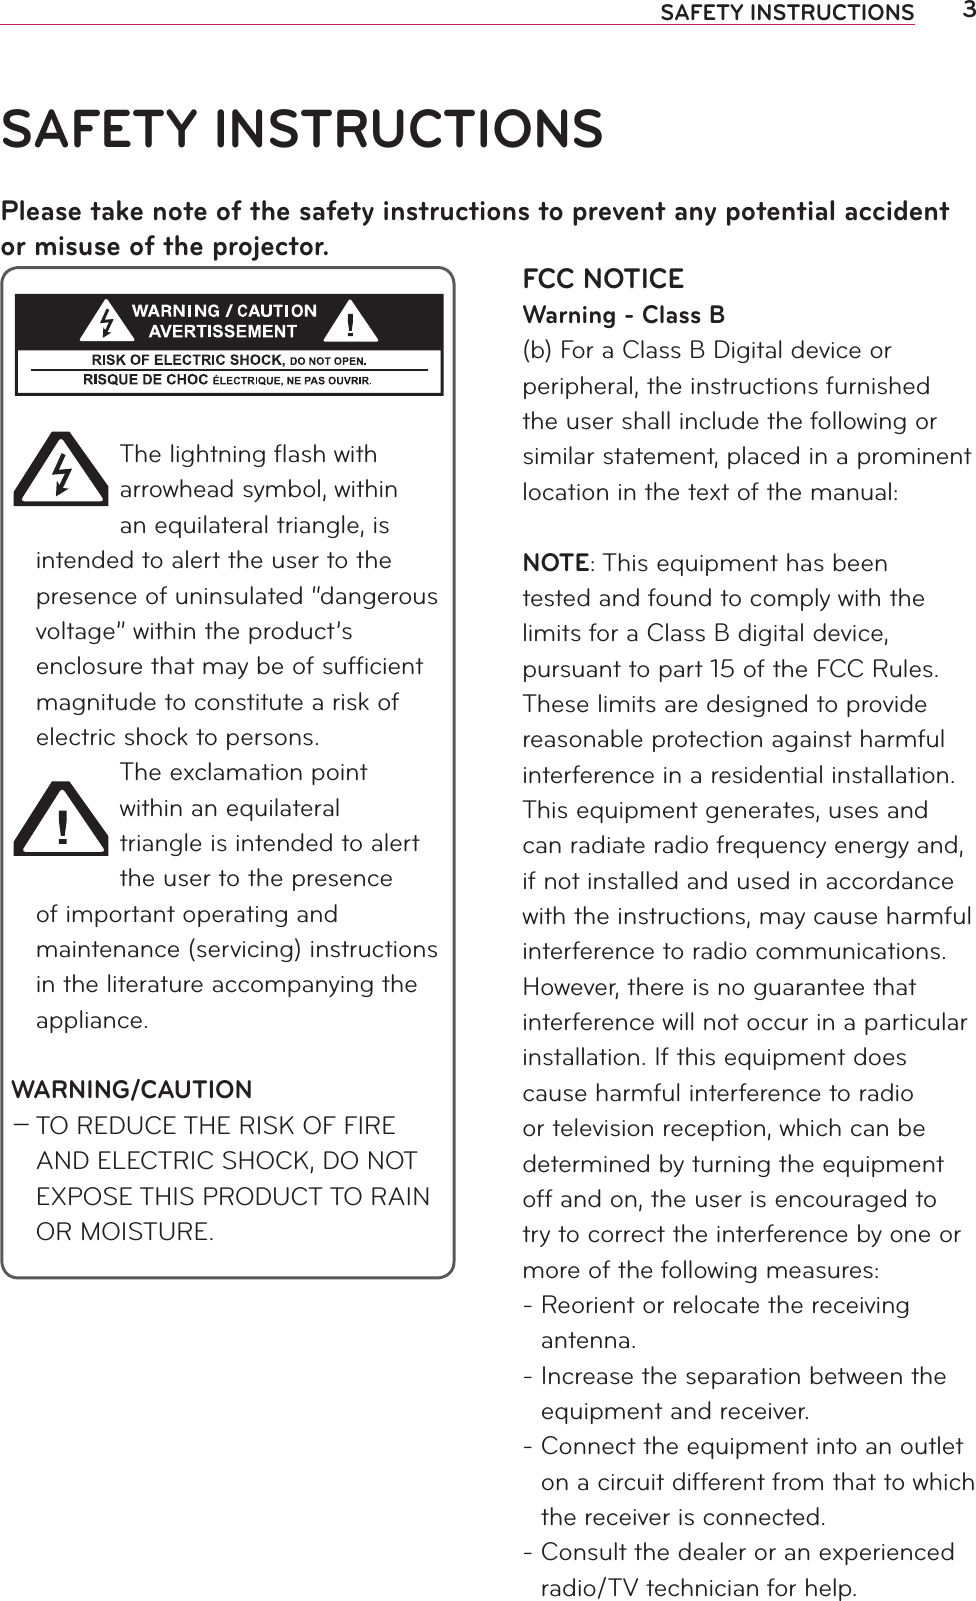 3SAFETY INSTRUCTIONSFCC NOTICEWarning - Class B(b) For a Class B Digital device or peripheral, the instructions furnished the user shall include the following or similar statement, placed in a prominent location in the text of the manual:NOTE: This equipment has been tested and found to comply with the limits for a Class B digital device, pursuant to part 15 of the FCC Rules. These limits are designed to provide reasonable protection against harmful interference in a residential installation. This equipment generates, uses and can radiate radio frequency energy and, if not installed and used in accordance with the instructions, may cause harmful interference to radio communications. However, there is no guarantee that interference will not occur in a particular installation. If this equipment does cause harmful interference to radio or television reception, which can be determined by turning the equipment off and on, the user is encouraged to try to correct the interference by one or more of the following measures:-  Reorient or relocate the receiving antenna.-  Increase the separation between the equipment and receiver.-  Connect the equipment into an outlet on a circuit different from that to which the receiver is connected.-  Consult the dealer or an experienced radio/TV technician for help.SAFETY INSTRUCTIONSPlease take note of the safety instructions to prevent any potential accident or misuse of the projector.The lightning ﬂash with arrowhead symbol, within an equilateral triangle, is intended to alert the user to the presence of uninsulated “dangerous voltage” within the product’s enclosure that may be of sufﬁcient magnitude to constitute a risk of electric shock to persons.The exclamation point within an equilateral triangle is intended to alert the user to the presence of important operating and maintenance (servicing) instructions in the literature accompanying the appliance.WARNING/CAUTION0 TO REDUCE THE RISK OF FIRE AND ELECTRIC SHOCK, DO NOT EXPOSE THIS PRODUCT TO RAIN OR MOISTURE.